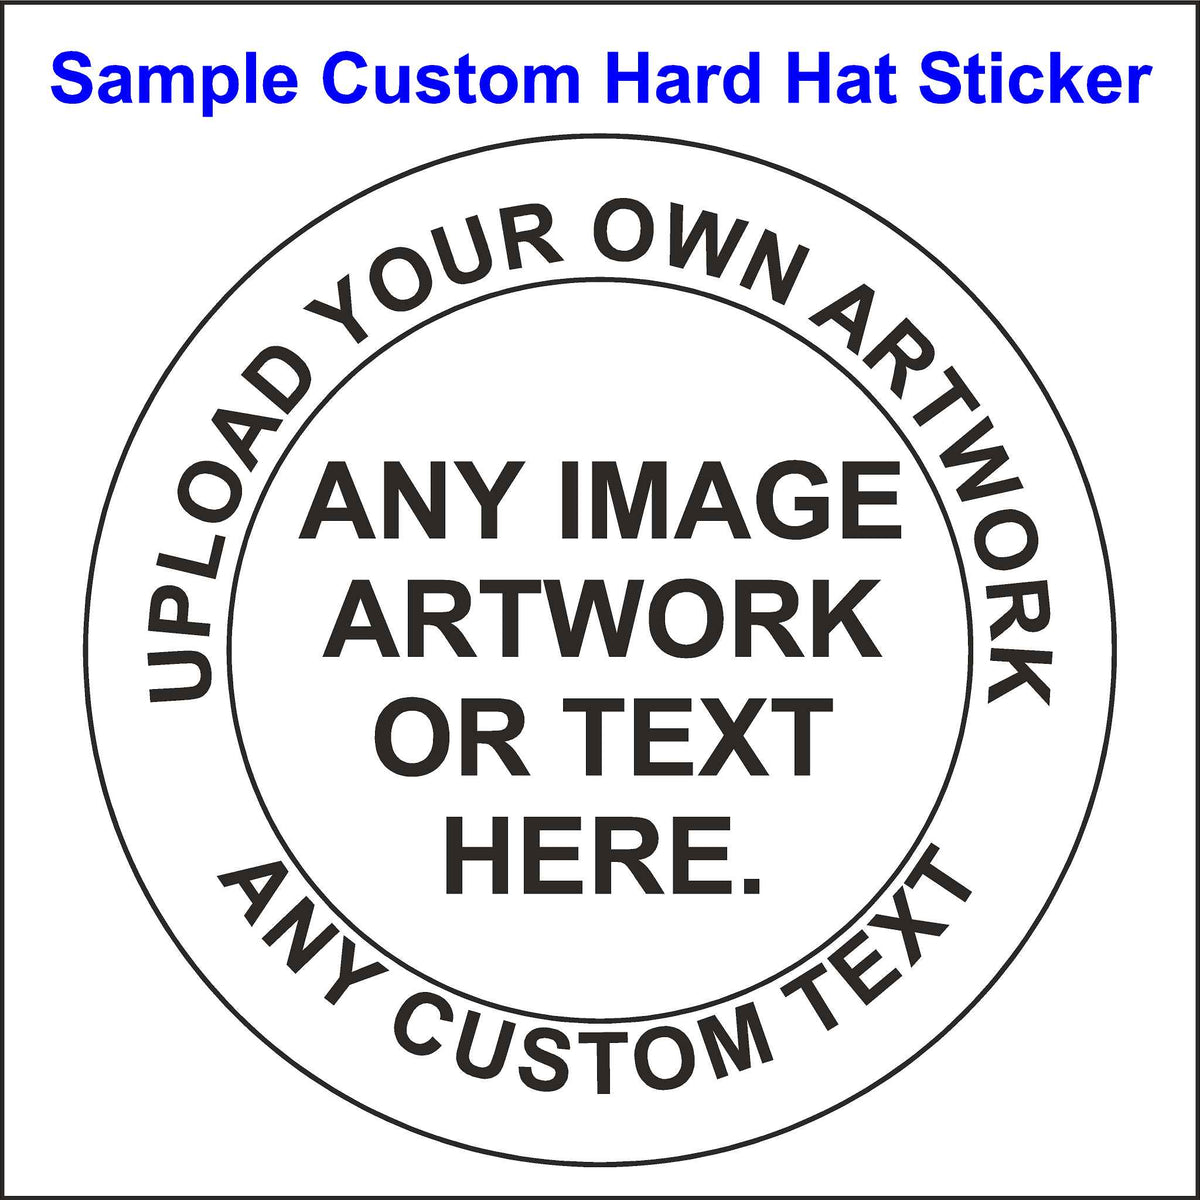 Custom Hard Hat Sticker Add Your Company Log and Custom Text to This Sticker.